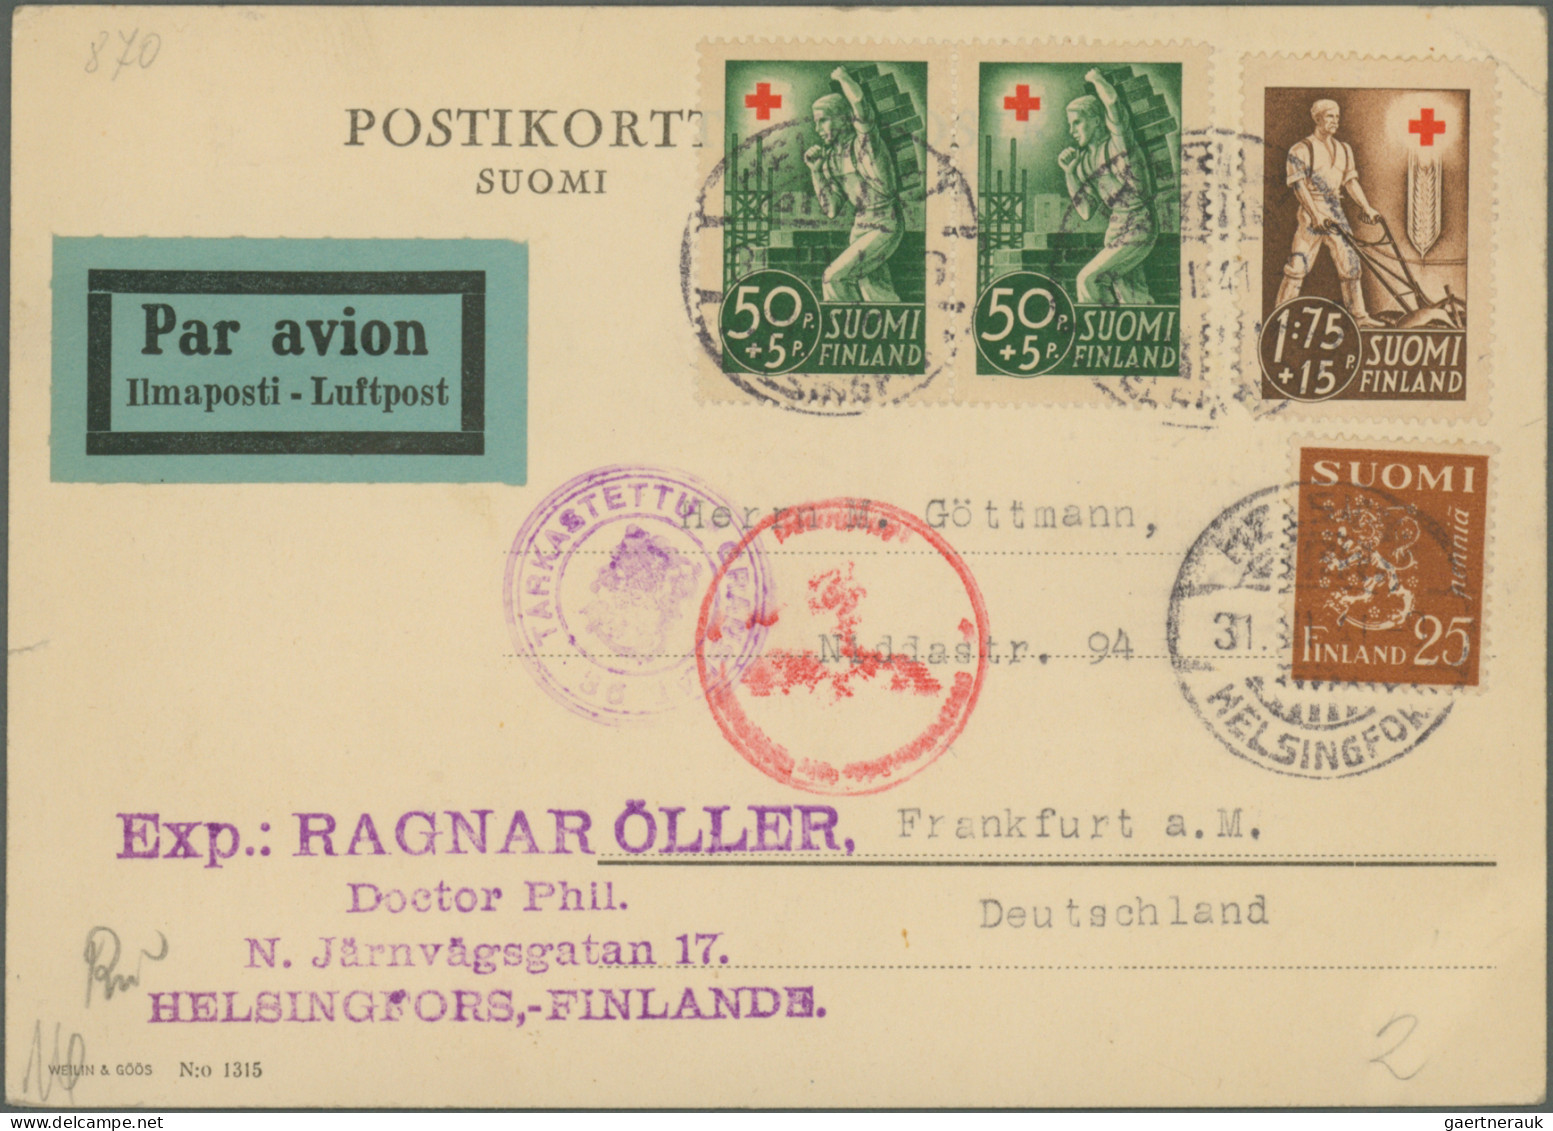 Finland: 1794/2010, sophisticated balance of apprx. 1.200 covers/cards with plen